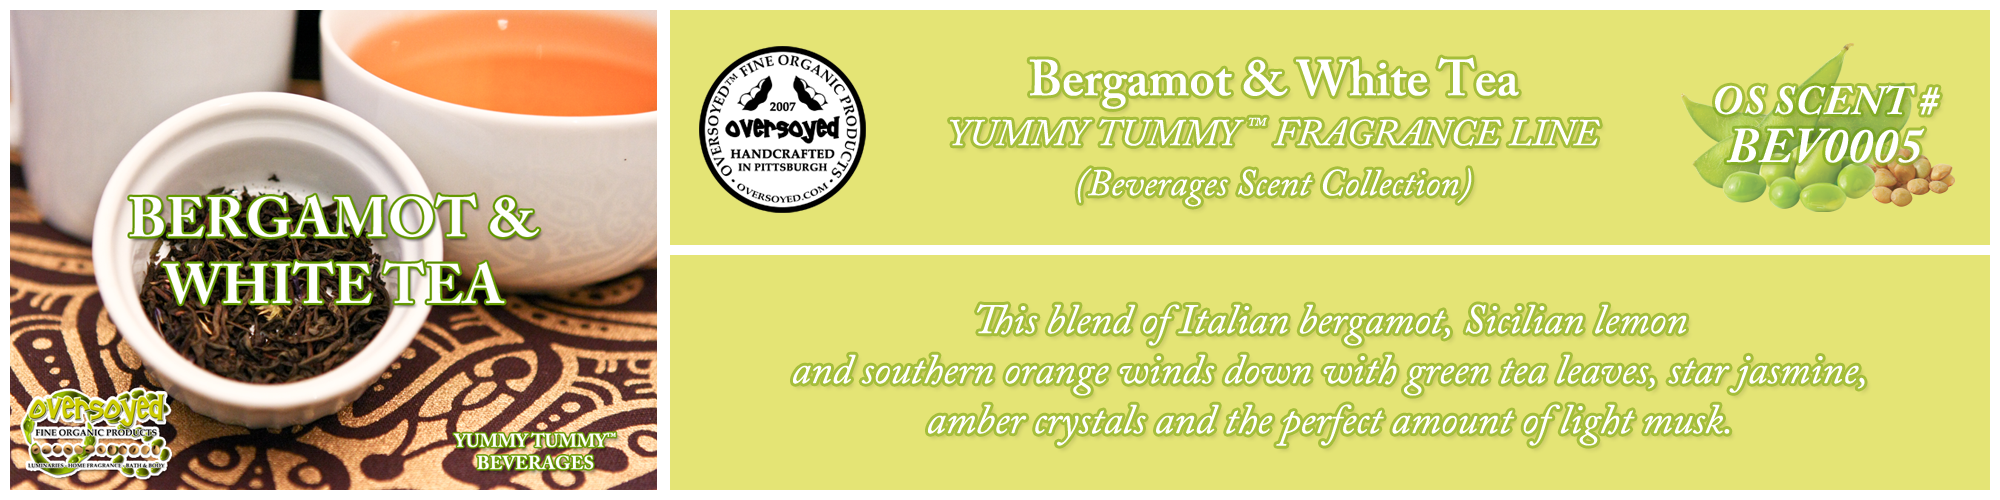 Bergamot & White Tea Handcrafted Products Collection